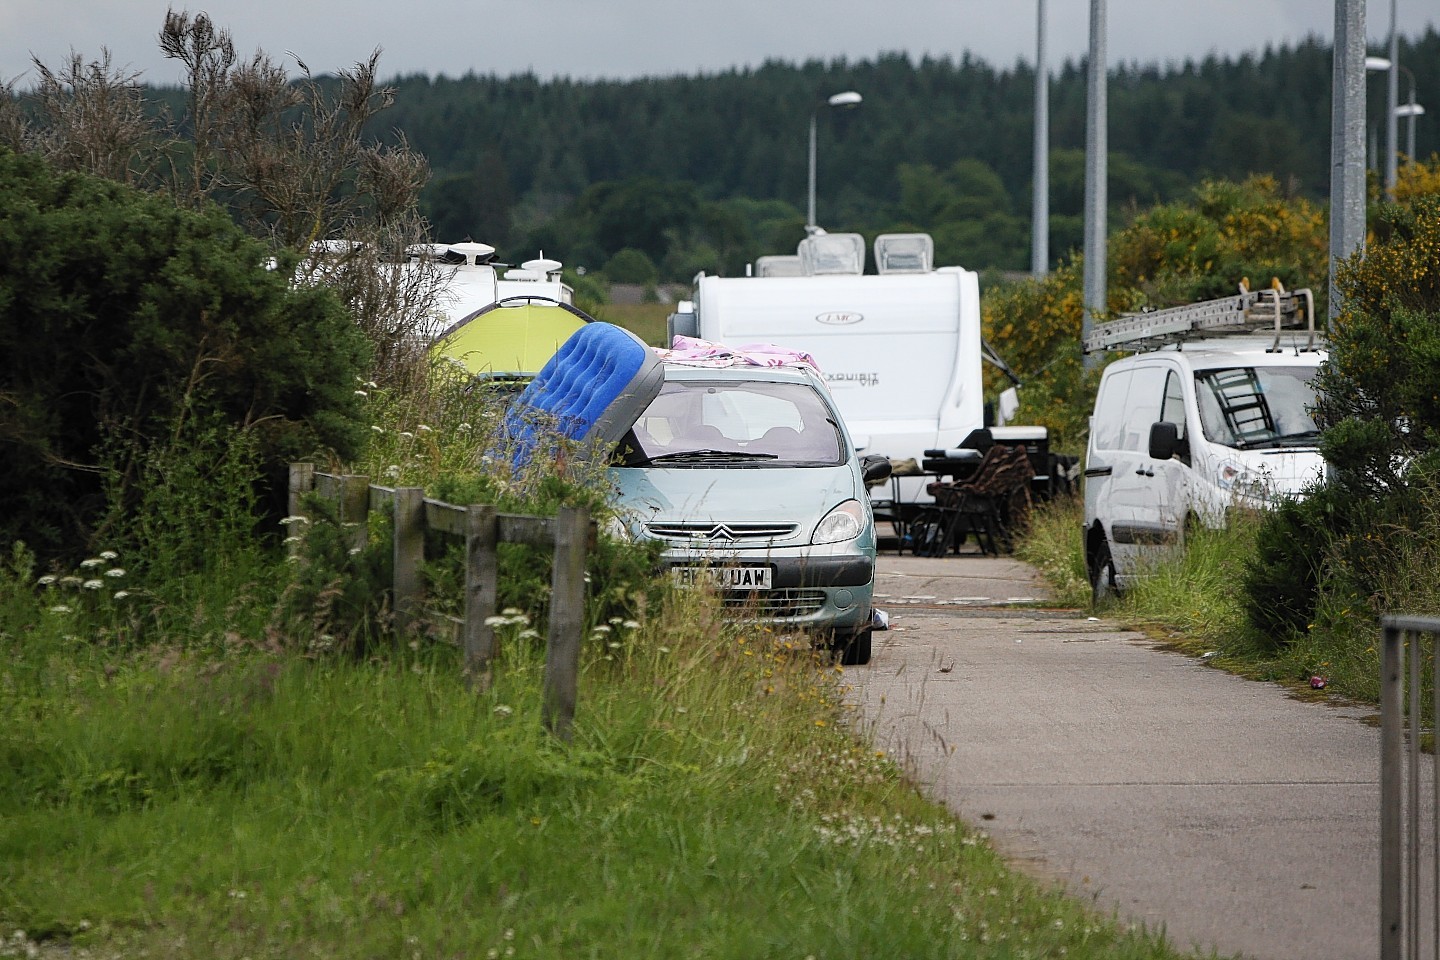 The travellers near Culloden, just off the A96